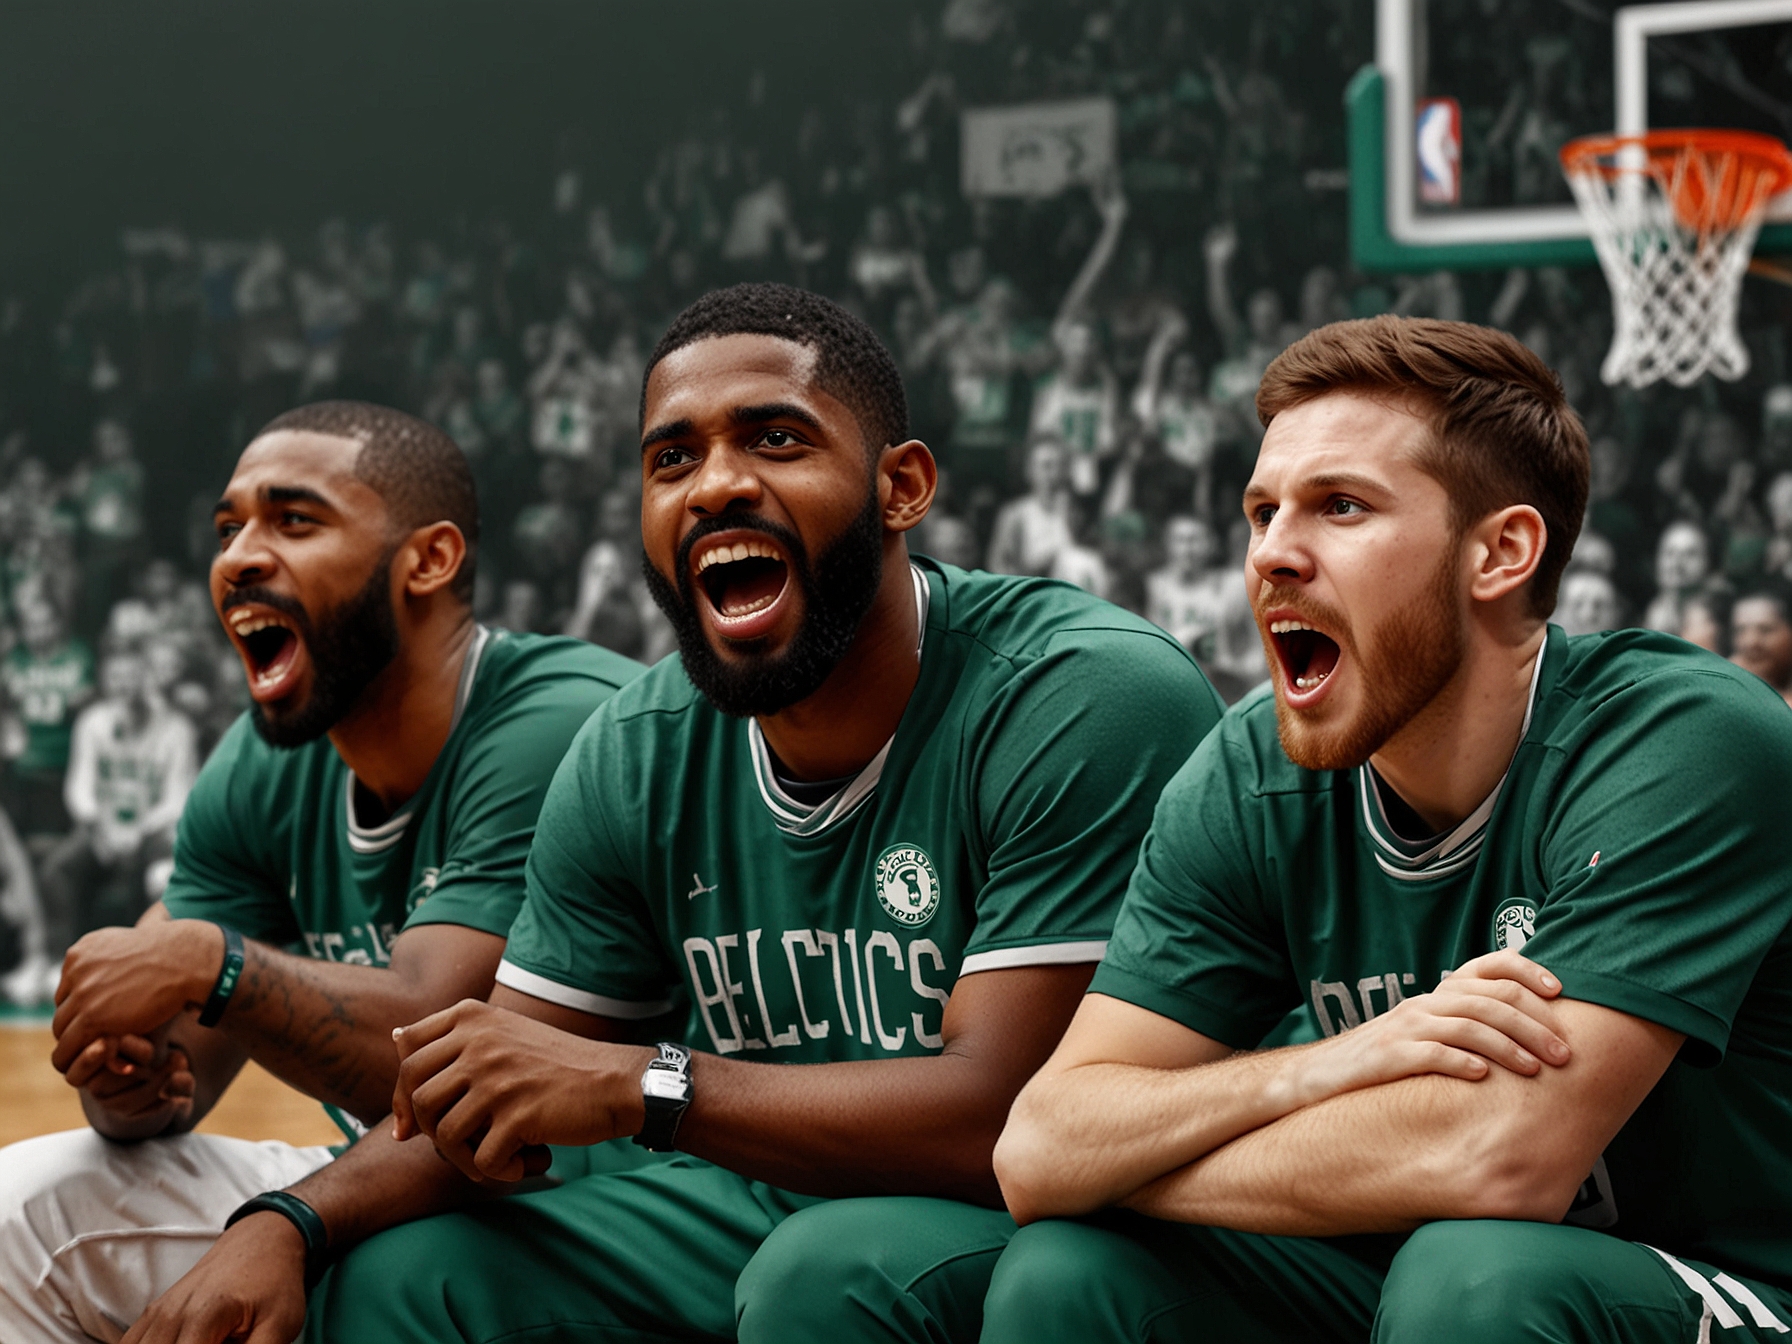 The Celtics' bench erupts in celebration during a crucial play, capturing the cohesiveness and excitement within the team contrasted by the palpable tension on Kyrie Irving's face.